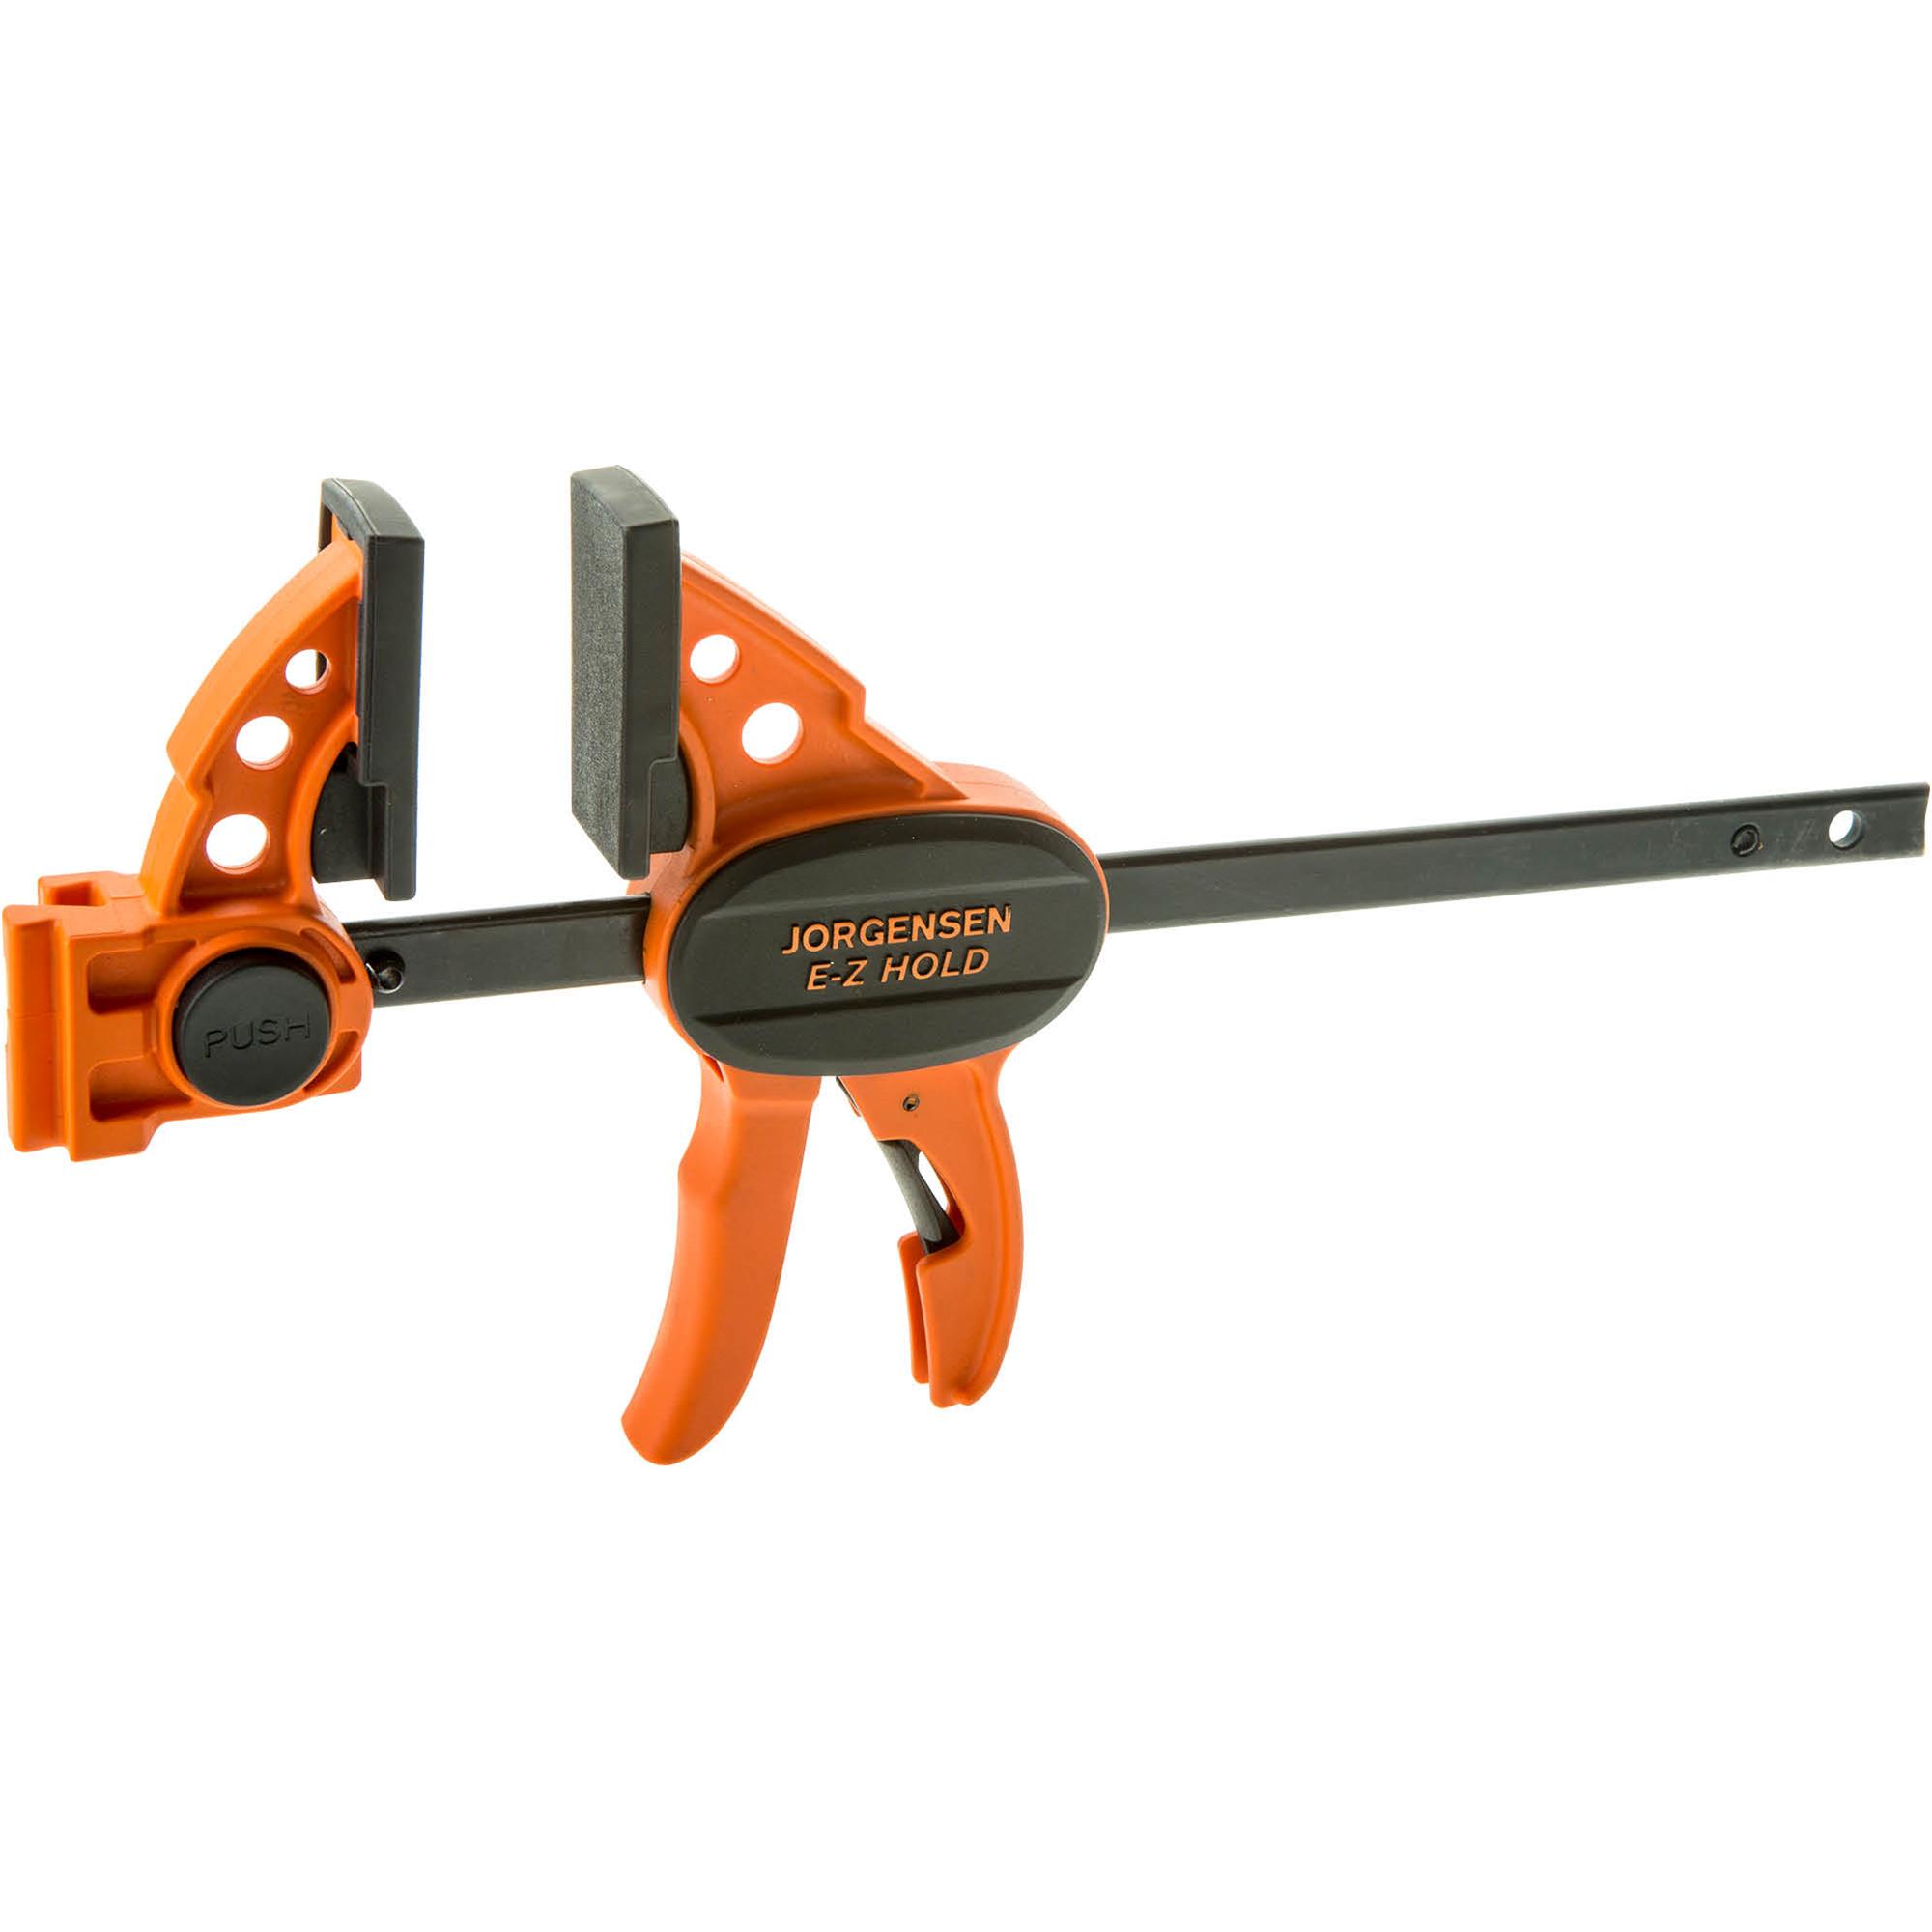 33808 E-Z Hold Bar Clamp, Clamping Range: 8 in, Comfort Grip Handle